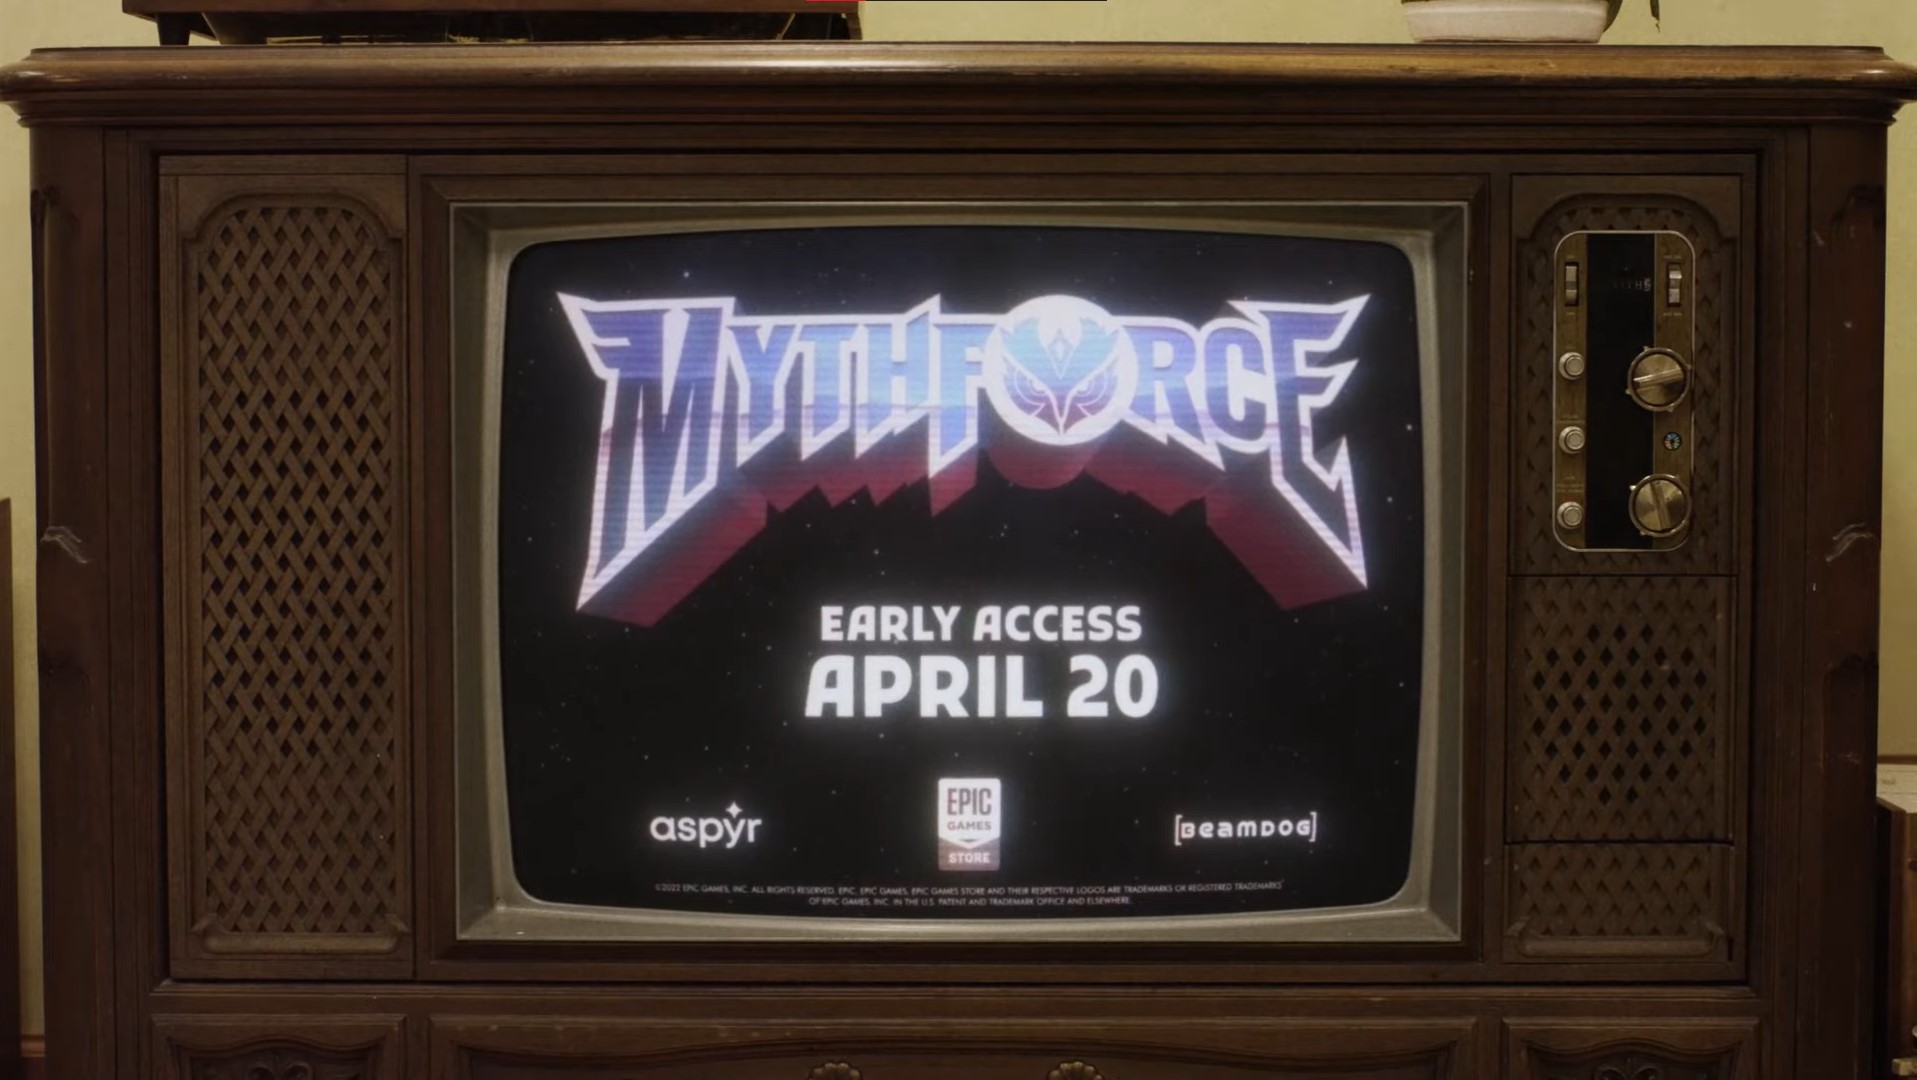 Screenshot from trailer. An old TV displays the MythForce logo, studio icons, and the release date message: Early Access April 20.